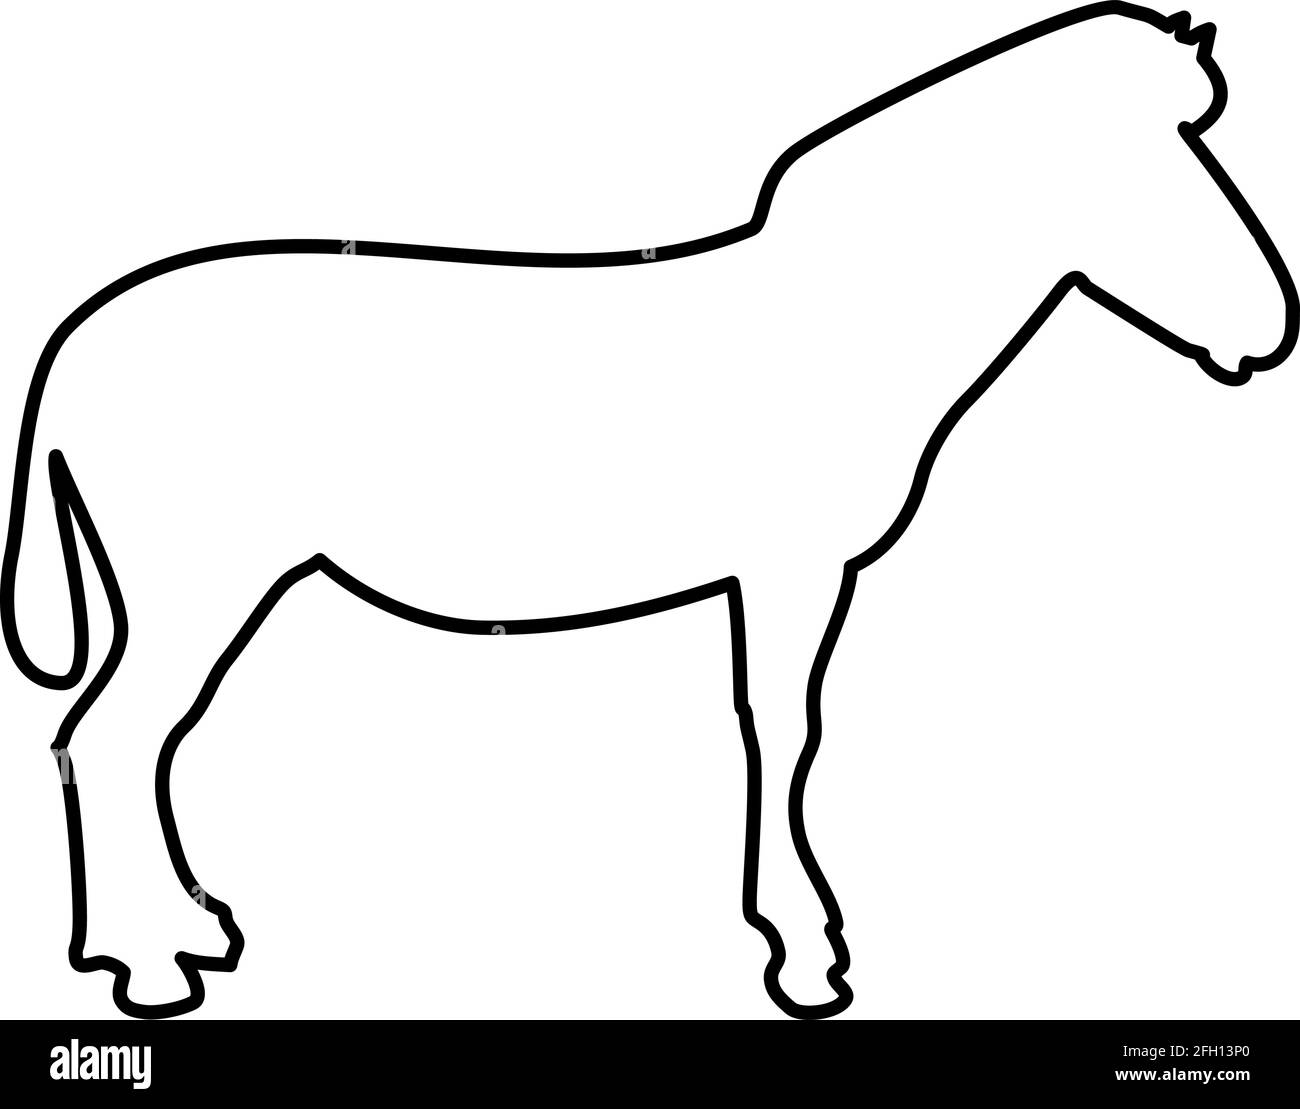 Zebra stand Animal standing contour outline black color vector illustration flat style simple image Stock Vector